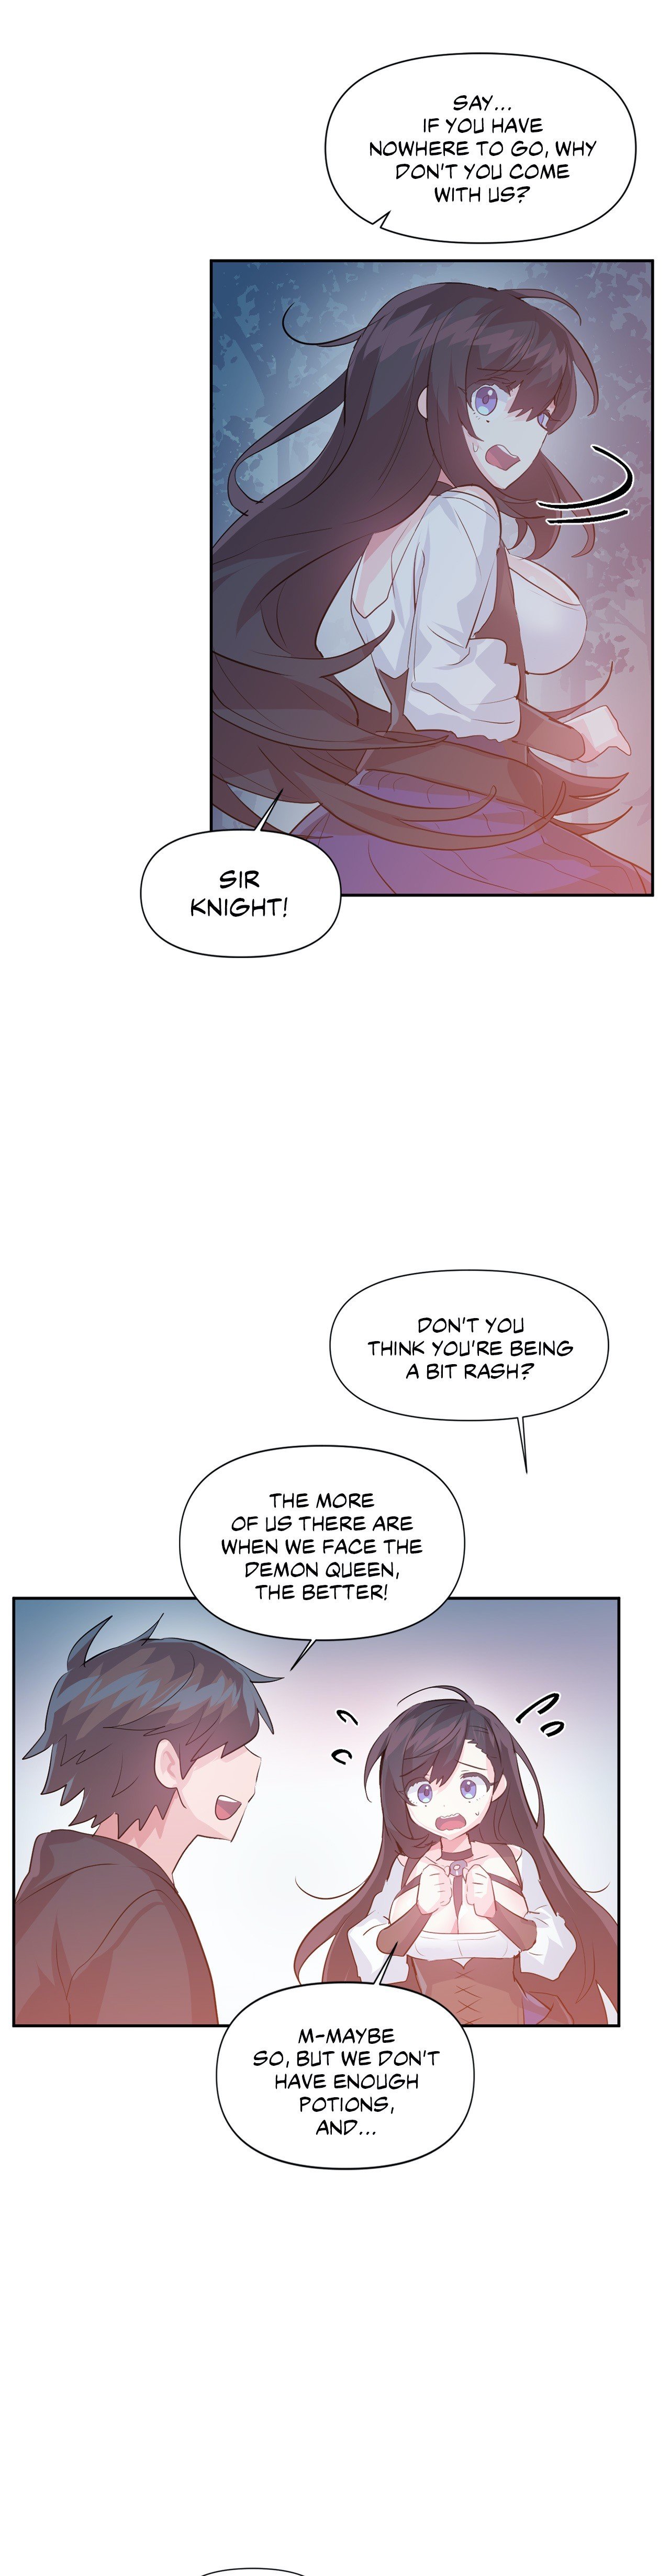 log-in-to-lust-a-land-chap-37-6